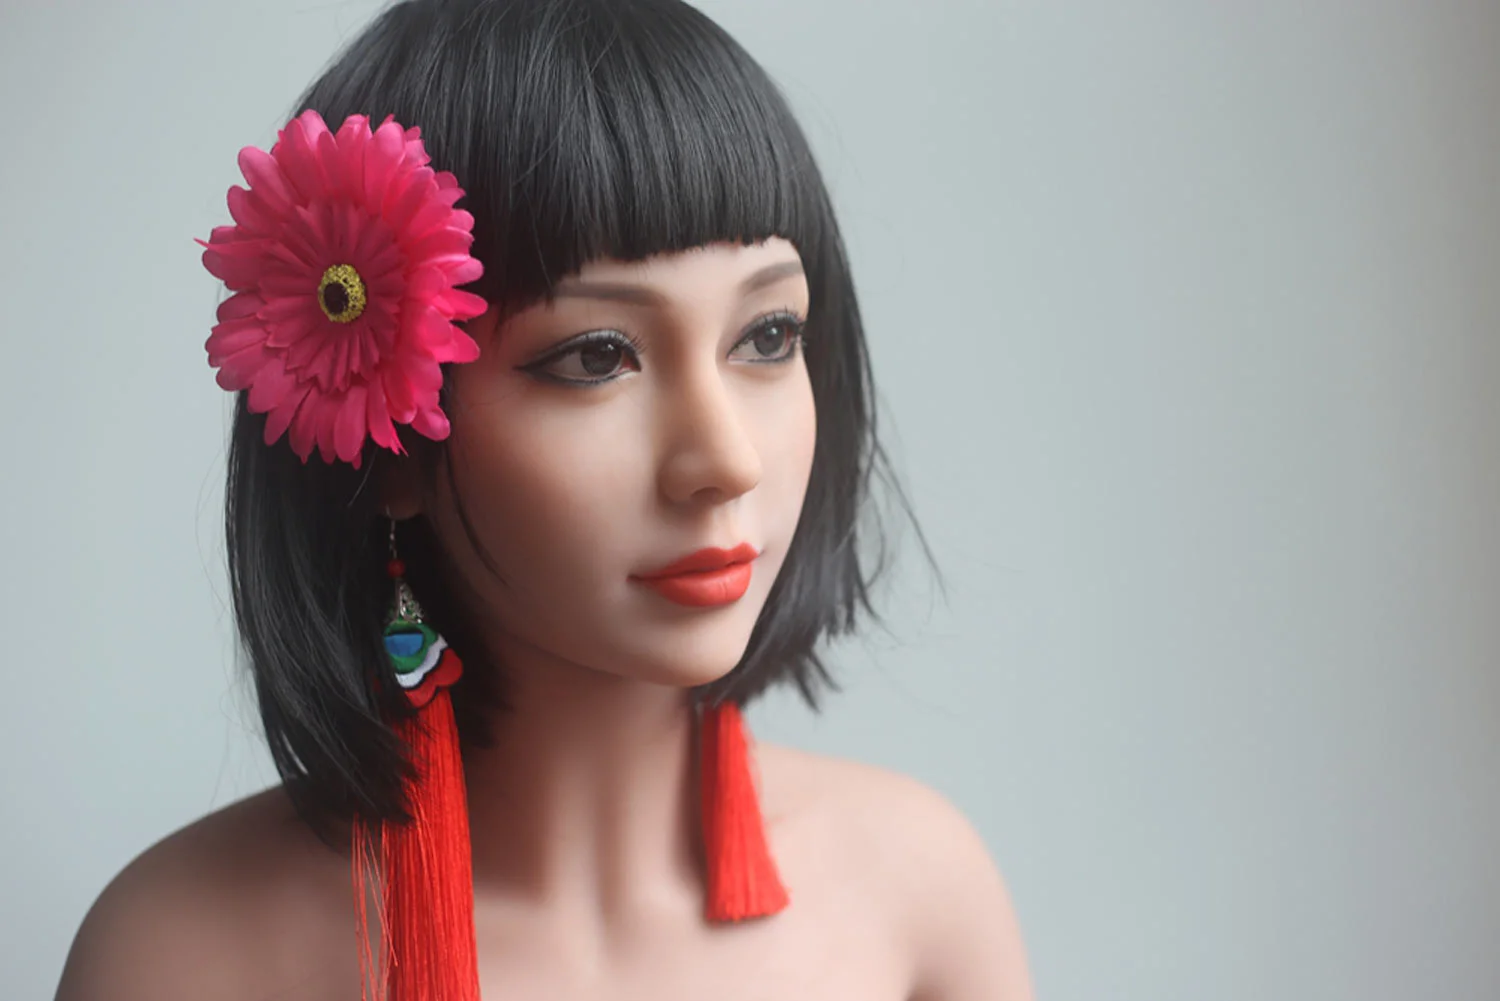 Sex doll with red flower